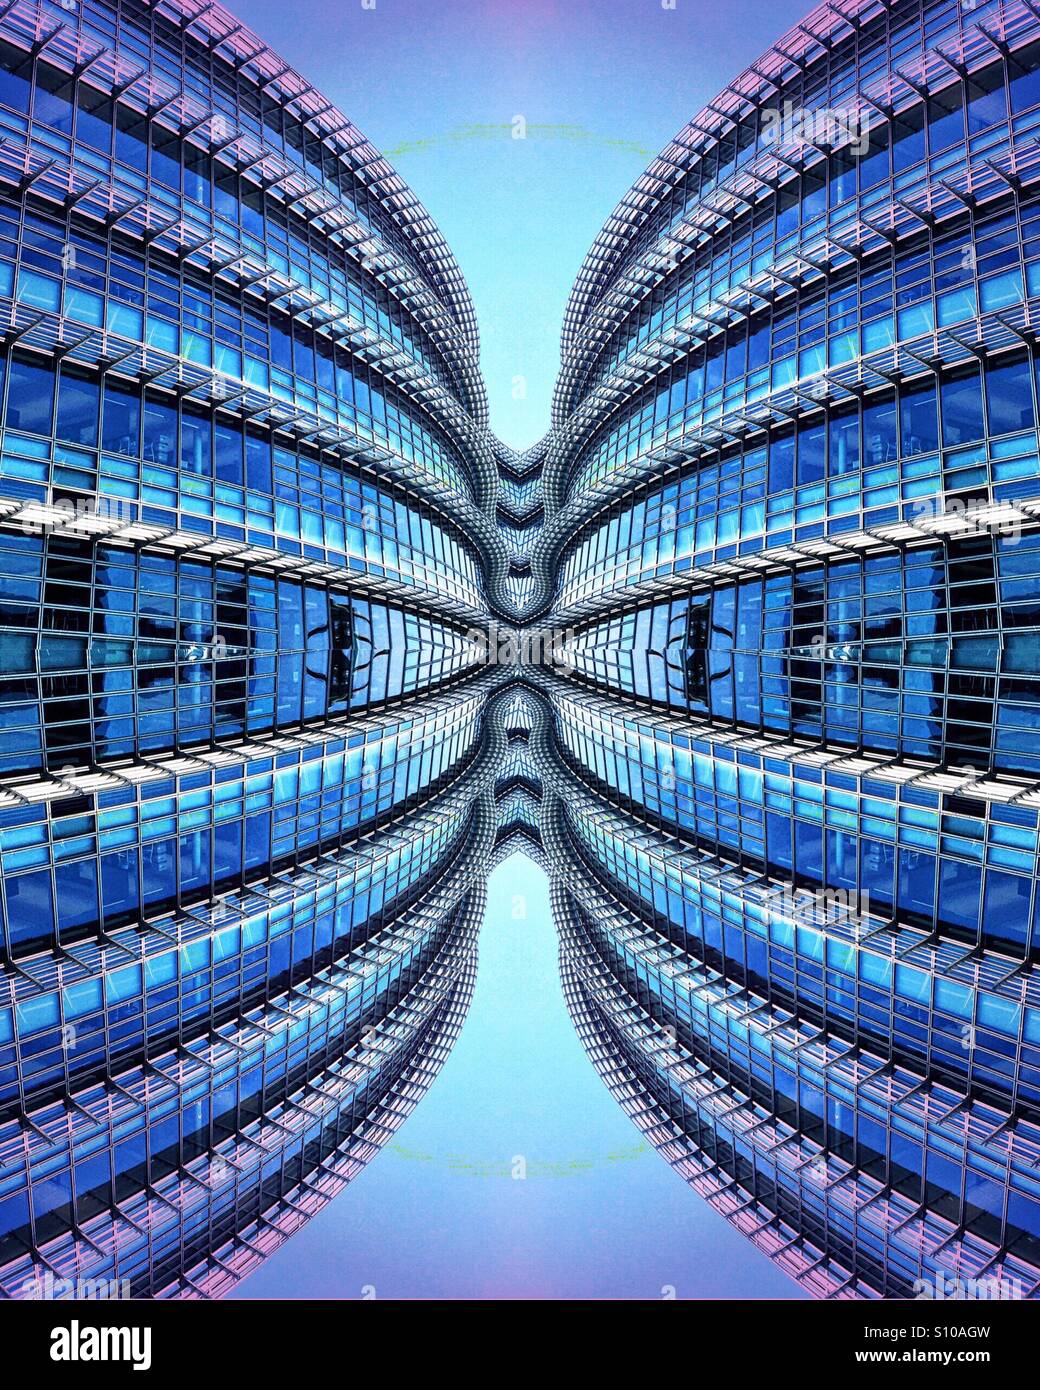 An abstract architectural image featuring curved, flowing lines converging in the center.  Blue tones Stock Photo